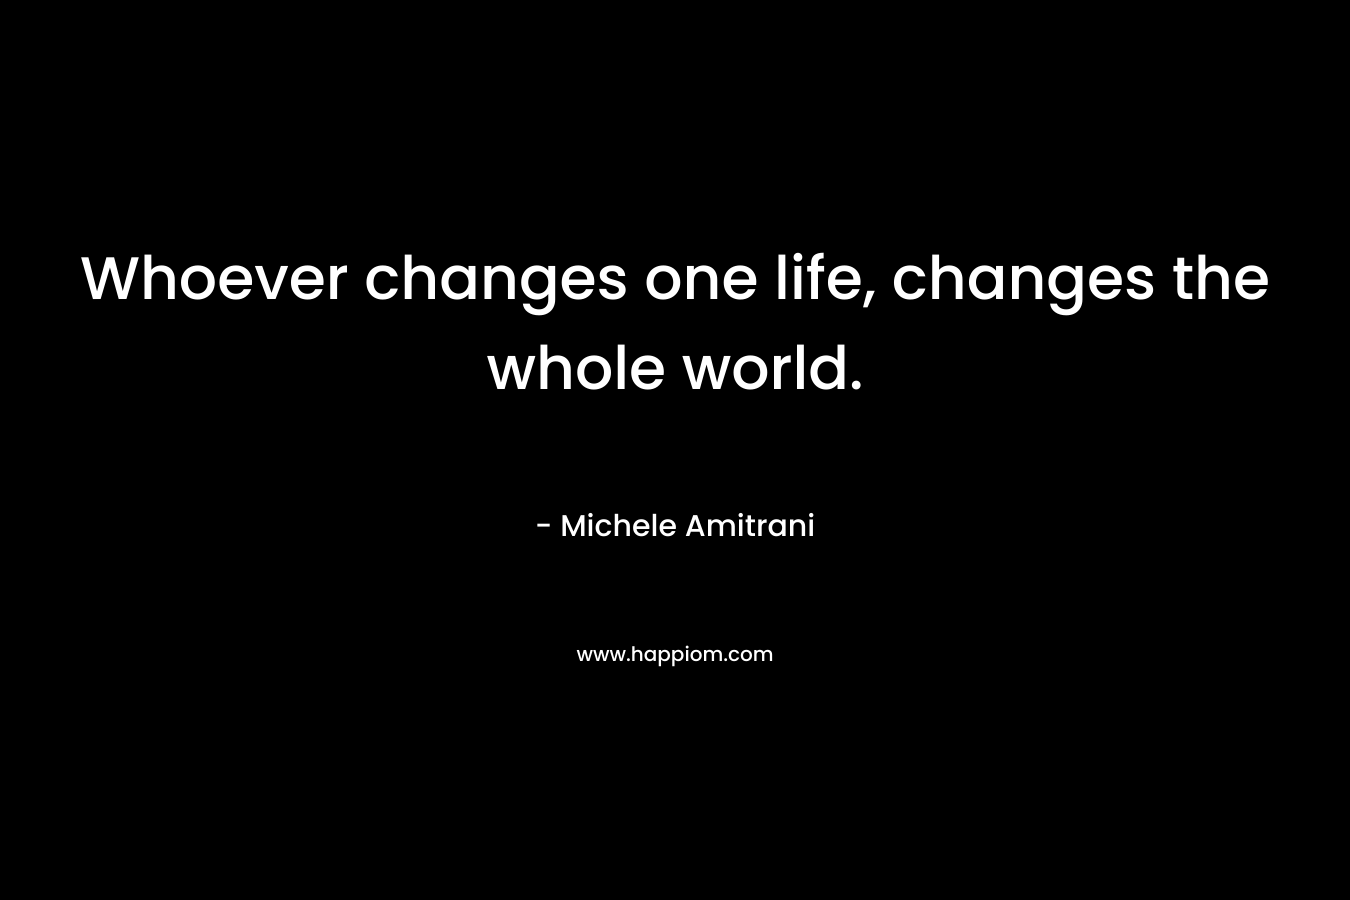 Whoever changes one life, changes the whole world.